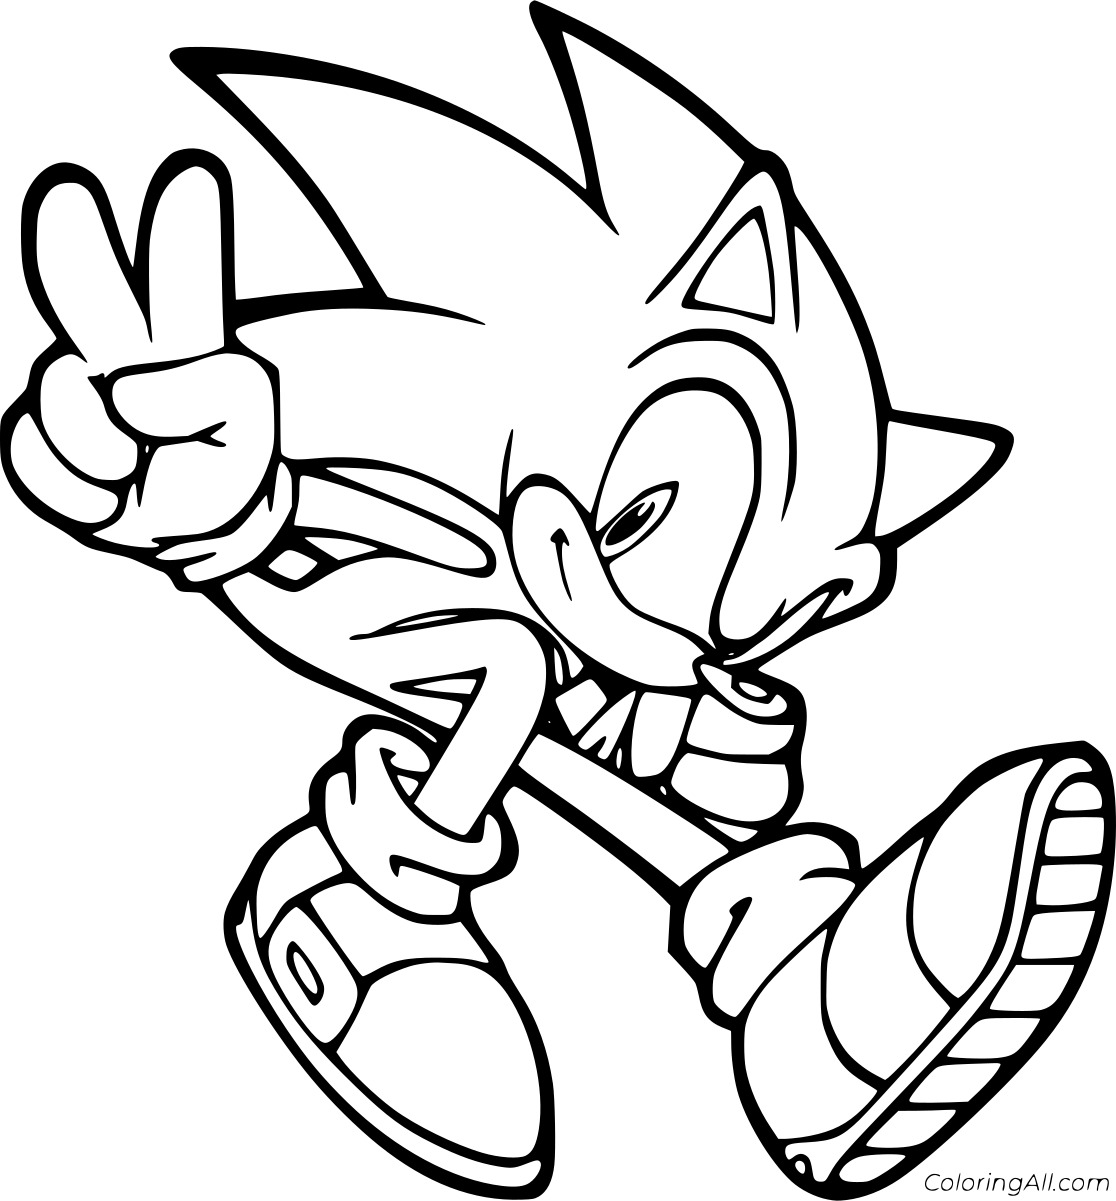 Sonic Made a Victory Gesture Free Printable